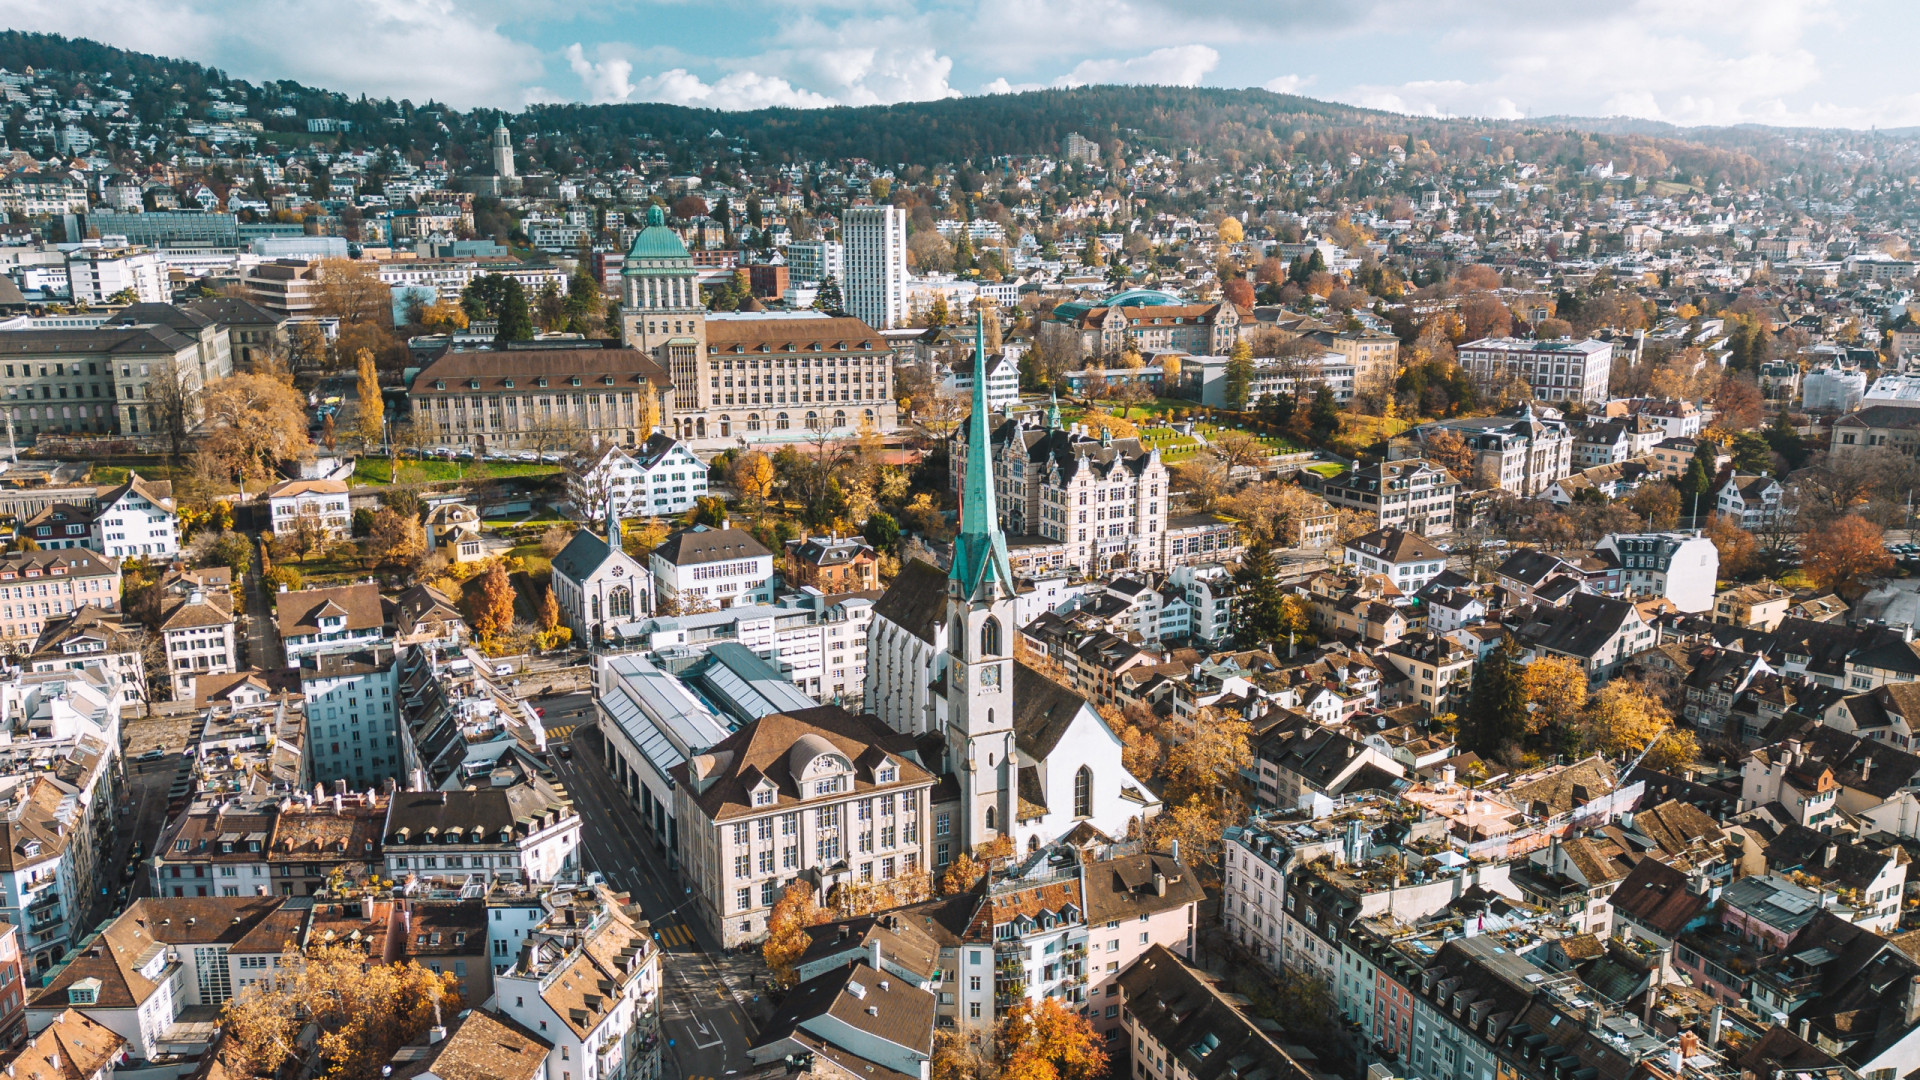 <p>Zurich scores 69.0 on the rent index, reflecting its status as a global financial center. Known for its pristine environment and affluent lifestyle, Zurich combines luxury with the tranquility of nature.</p><p><a href="https://www.msn.com/en-in/community/channel/vid-7xx8mnucu55yw63we9va2gwr7uihbxwc68fxqp25x6tg4ftibpra?cvid=94631541bc0f4f89bfd59158d696ad7e">Follow us and access great exclusive content every day</a></p>